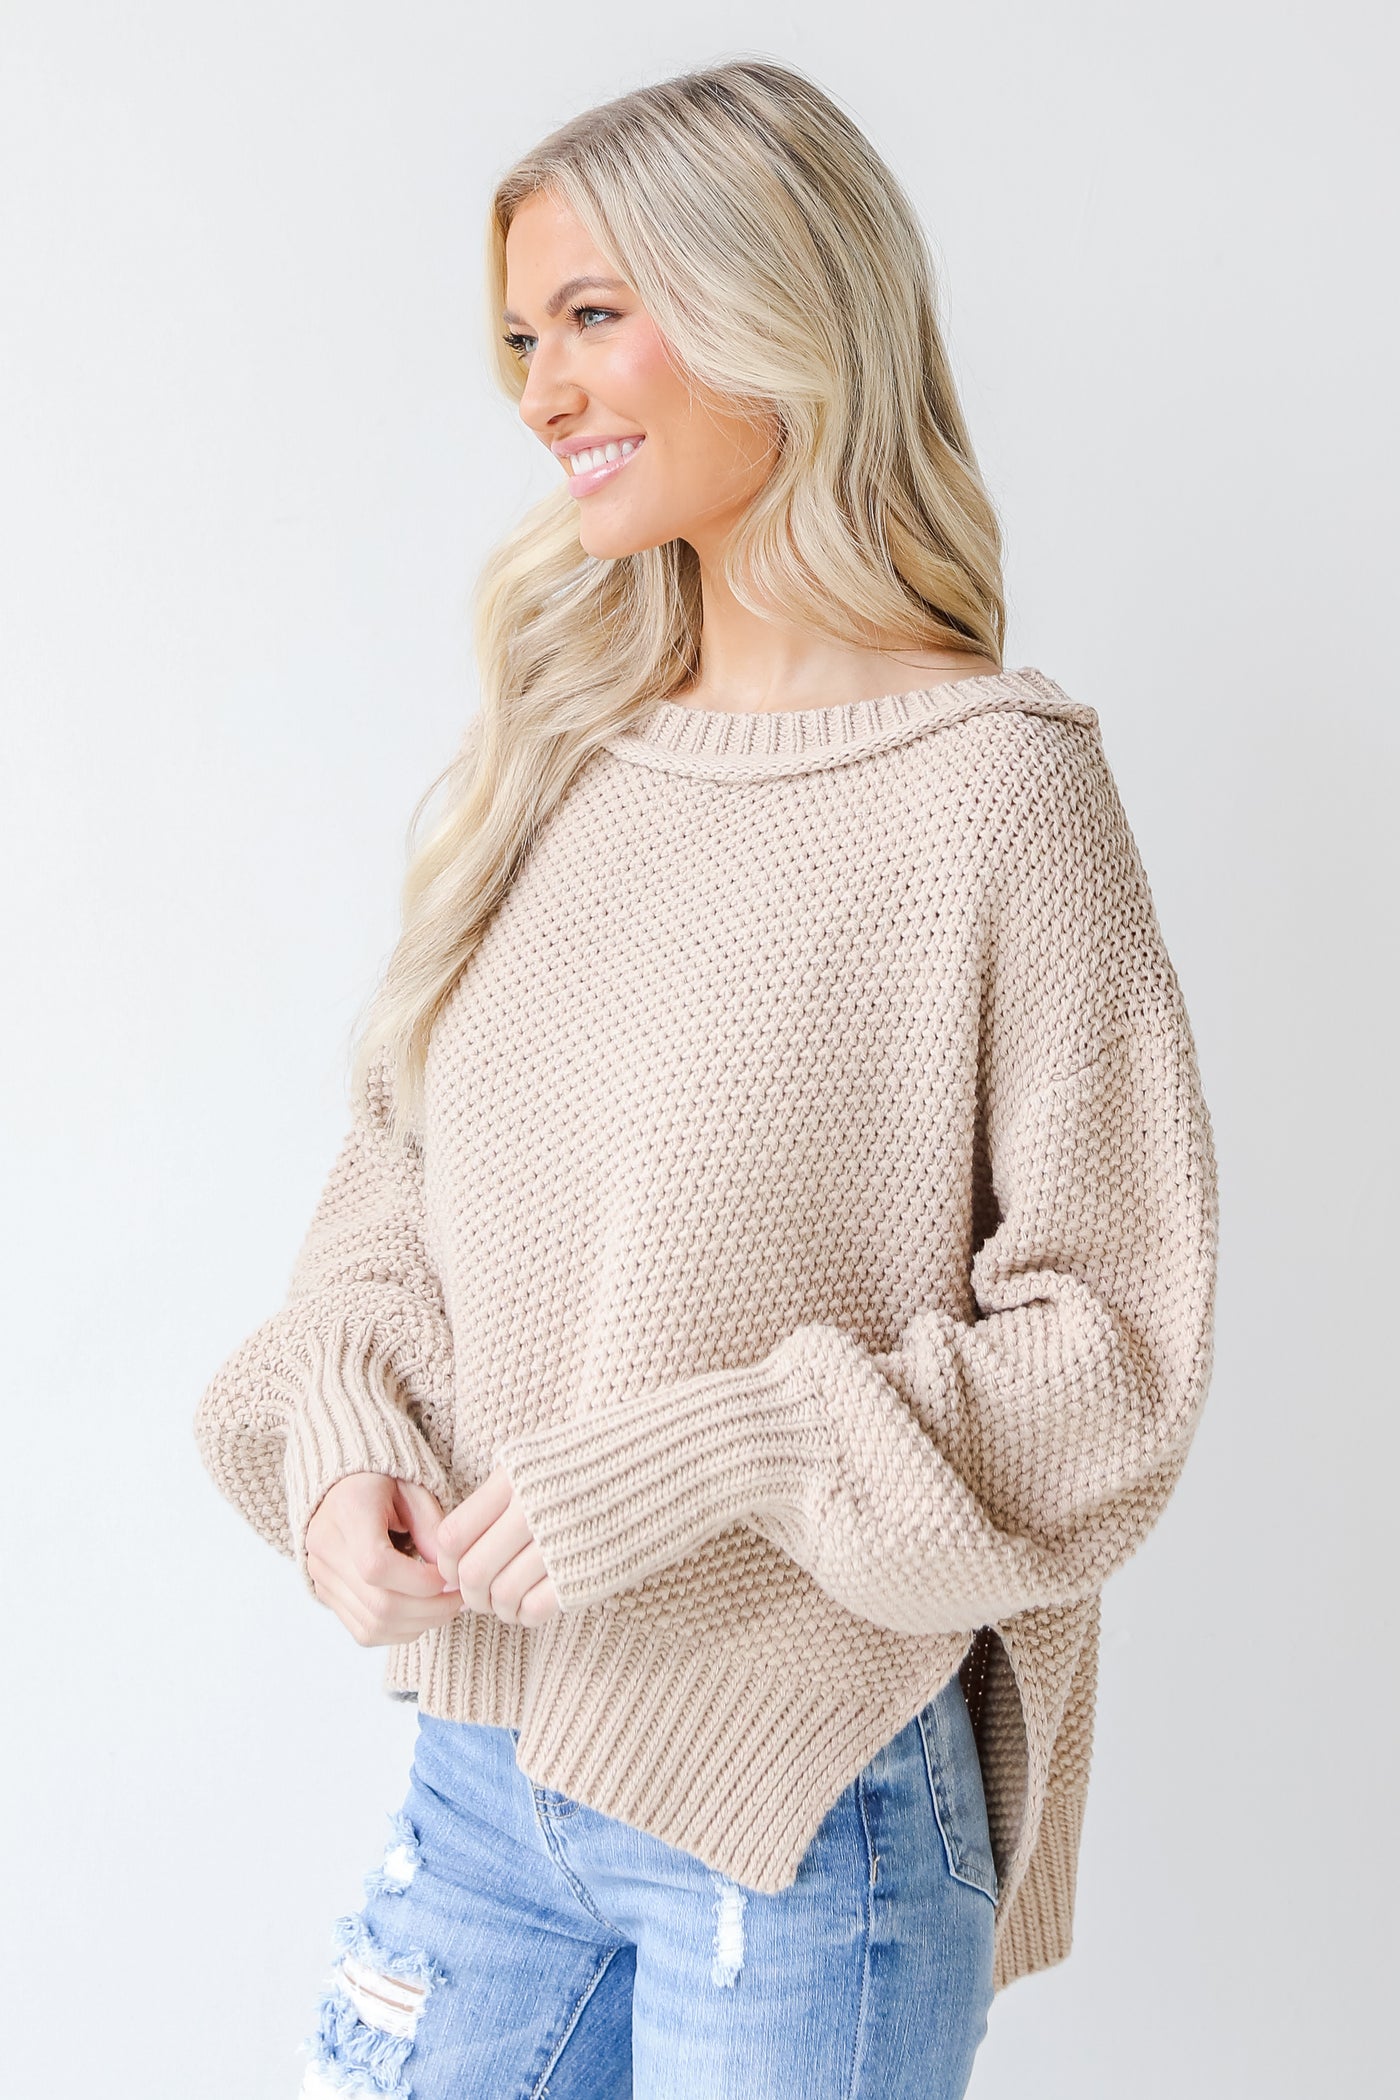 Sweater in taupe side view